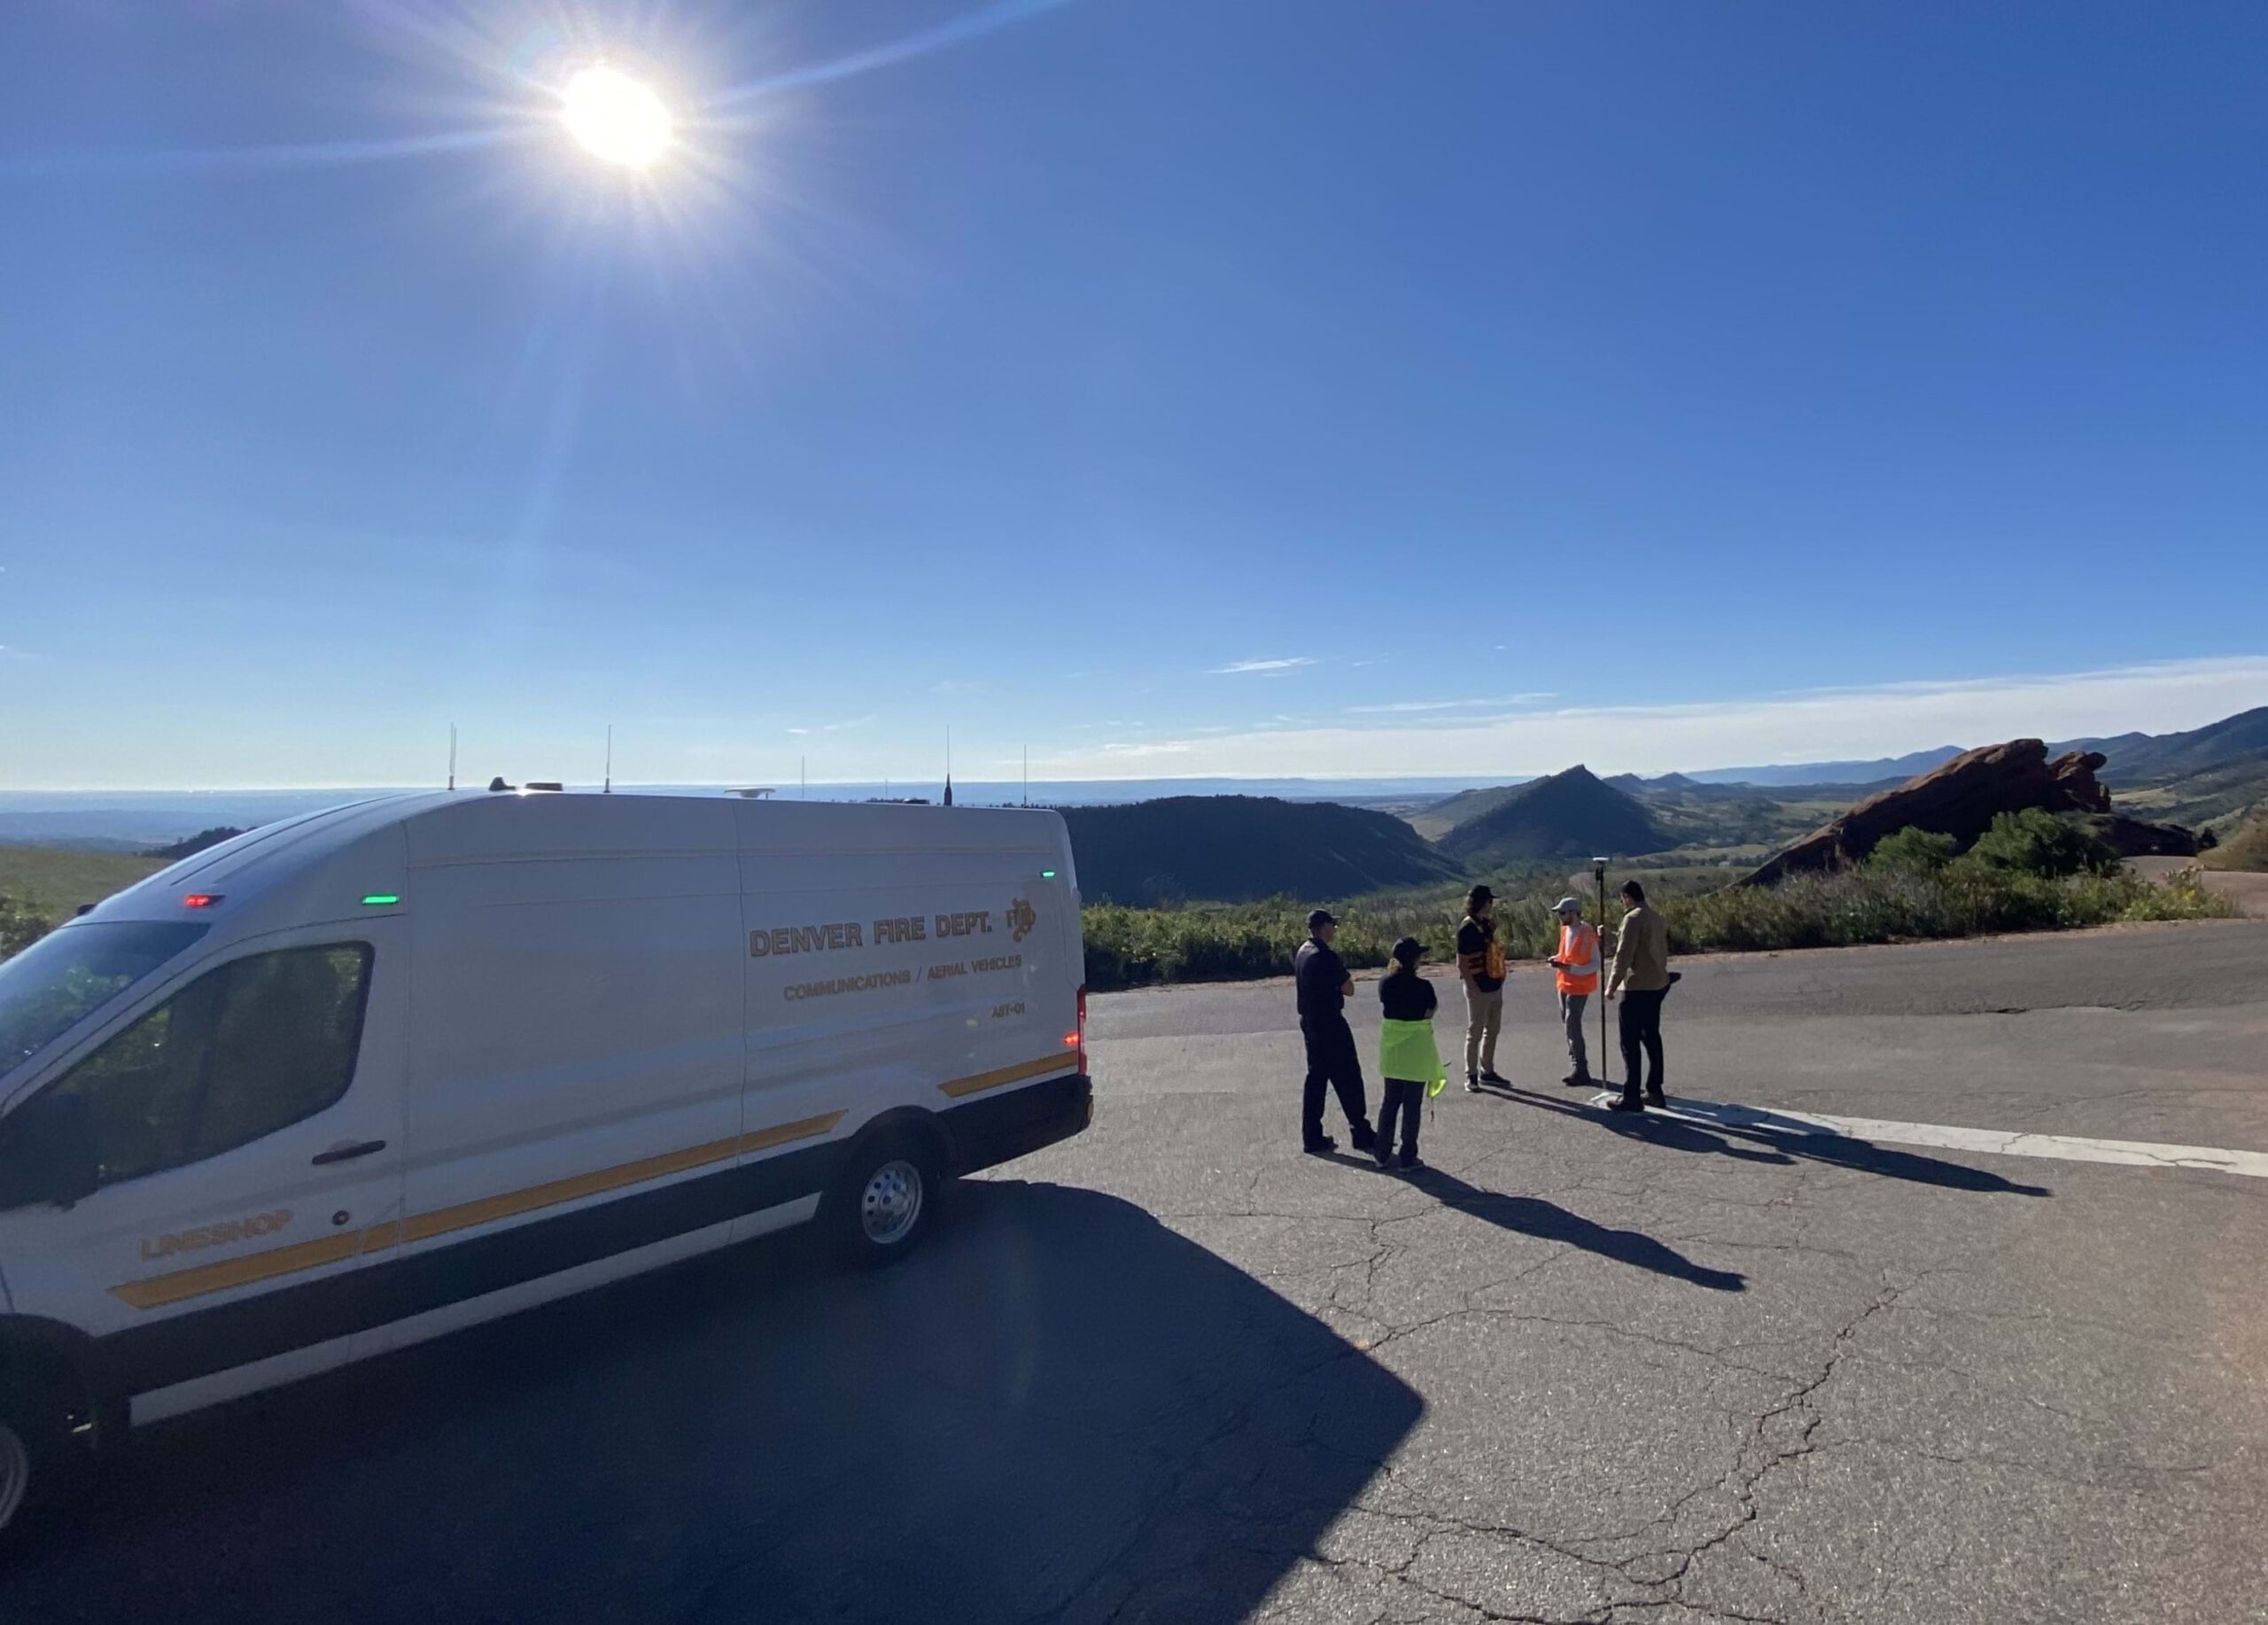 A team of people stand by a van overlooking the mountains